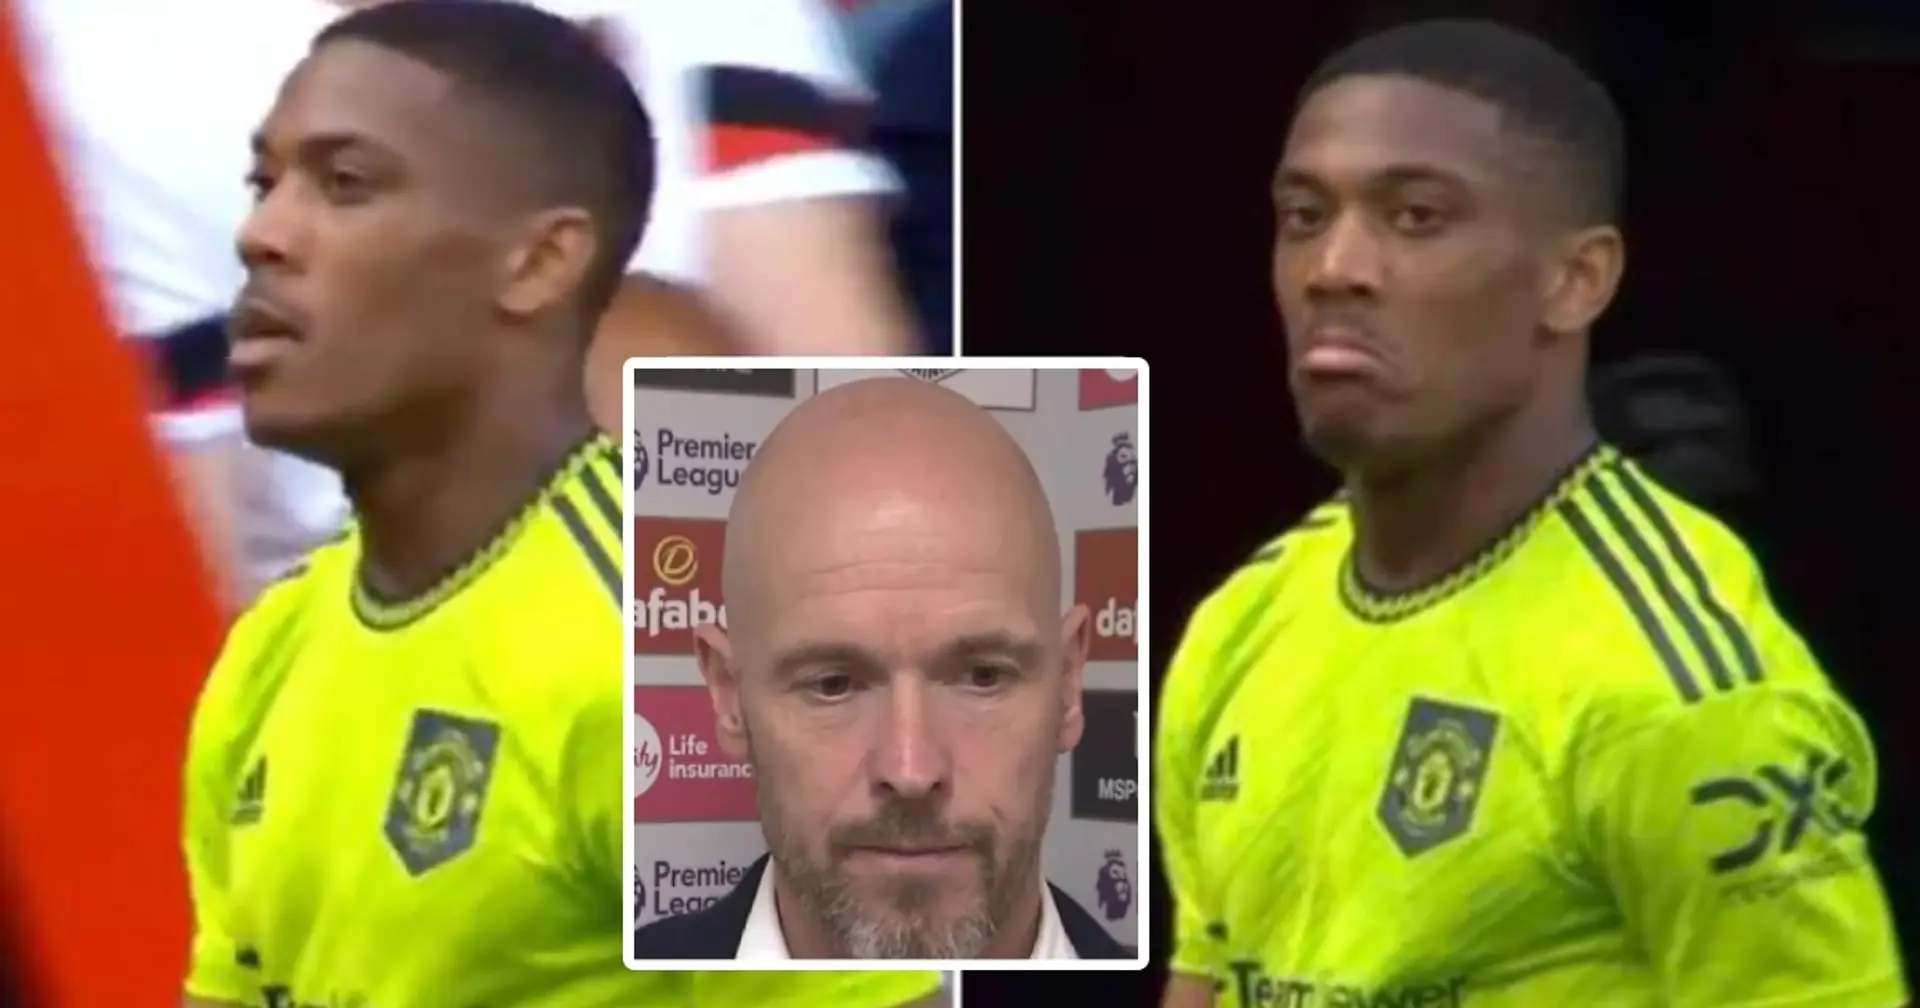 'I think he played well': Ten Hag reacts to Martial storming down tunnel after substitution 